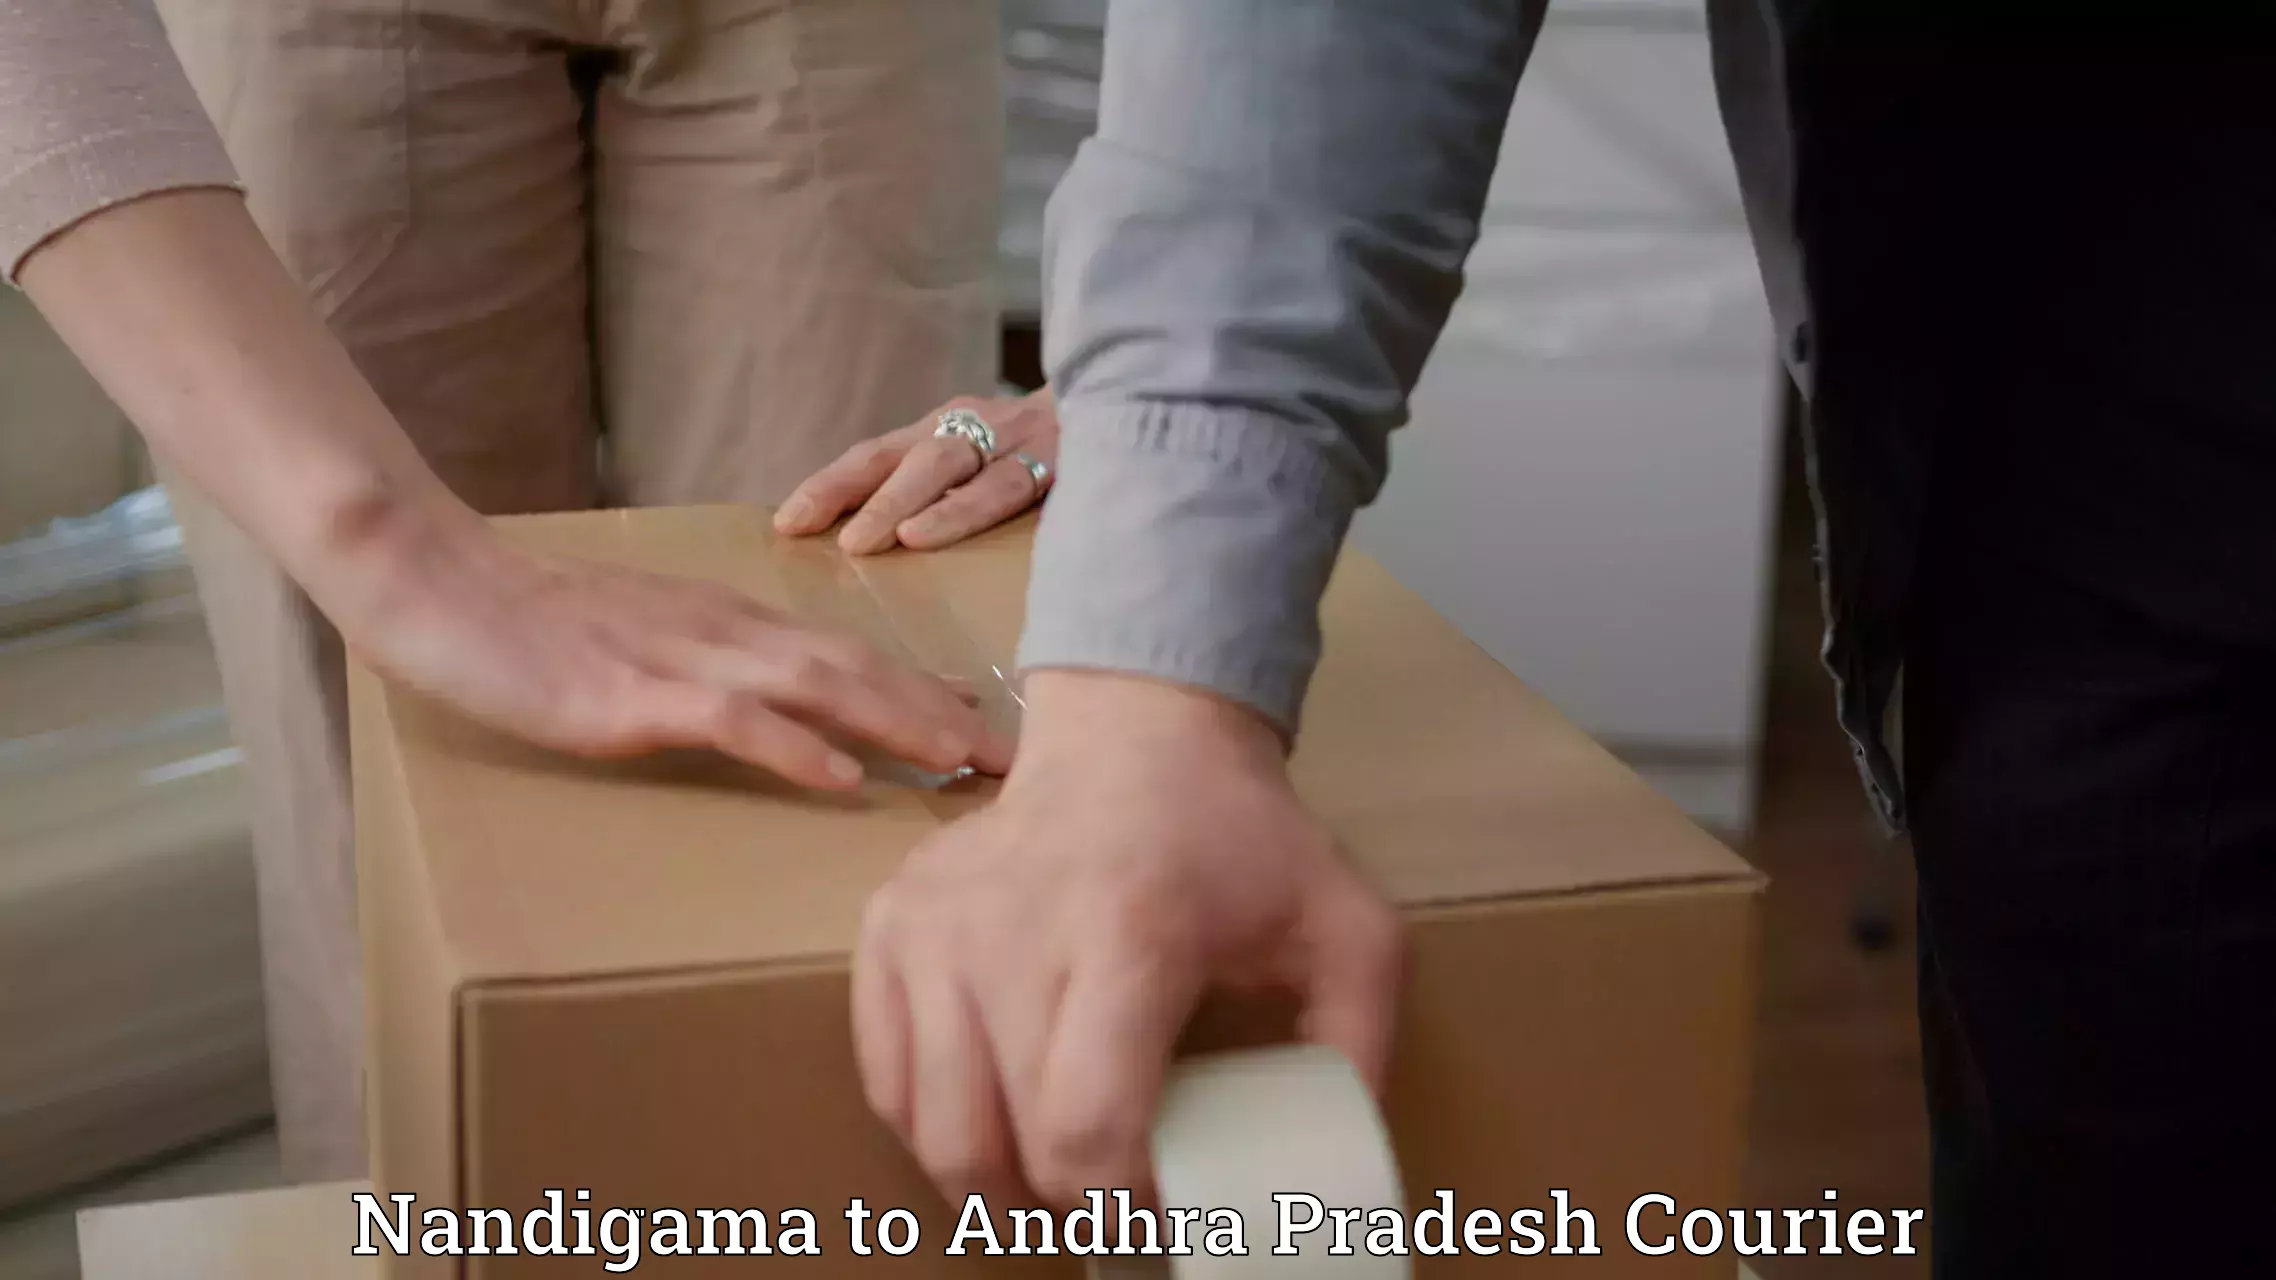 Cash on delivery service Nandigama to Andhra Pradesh